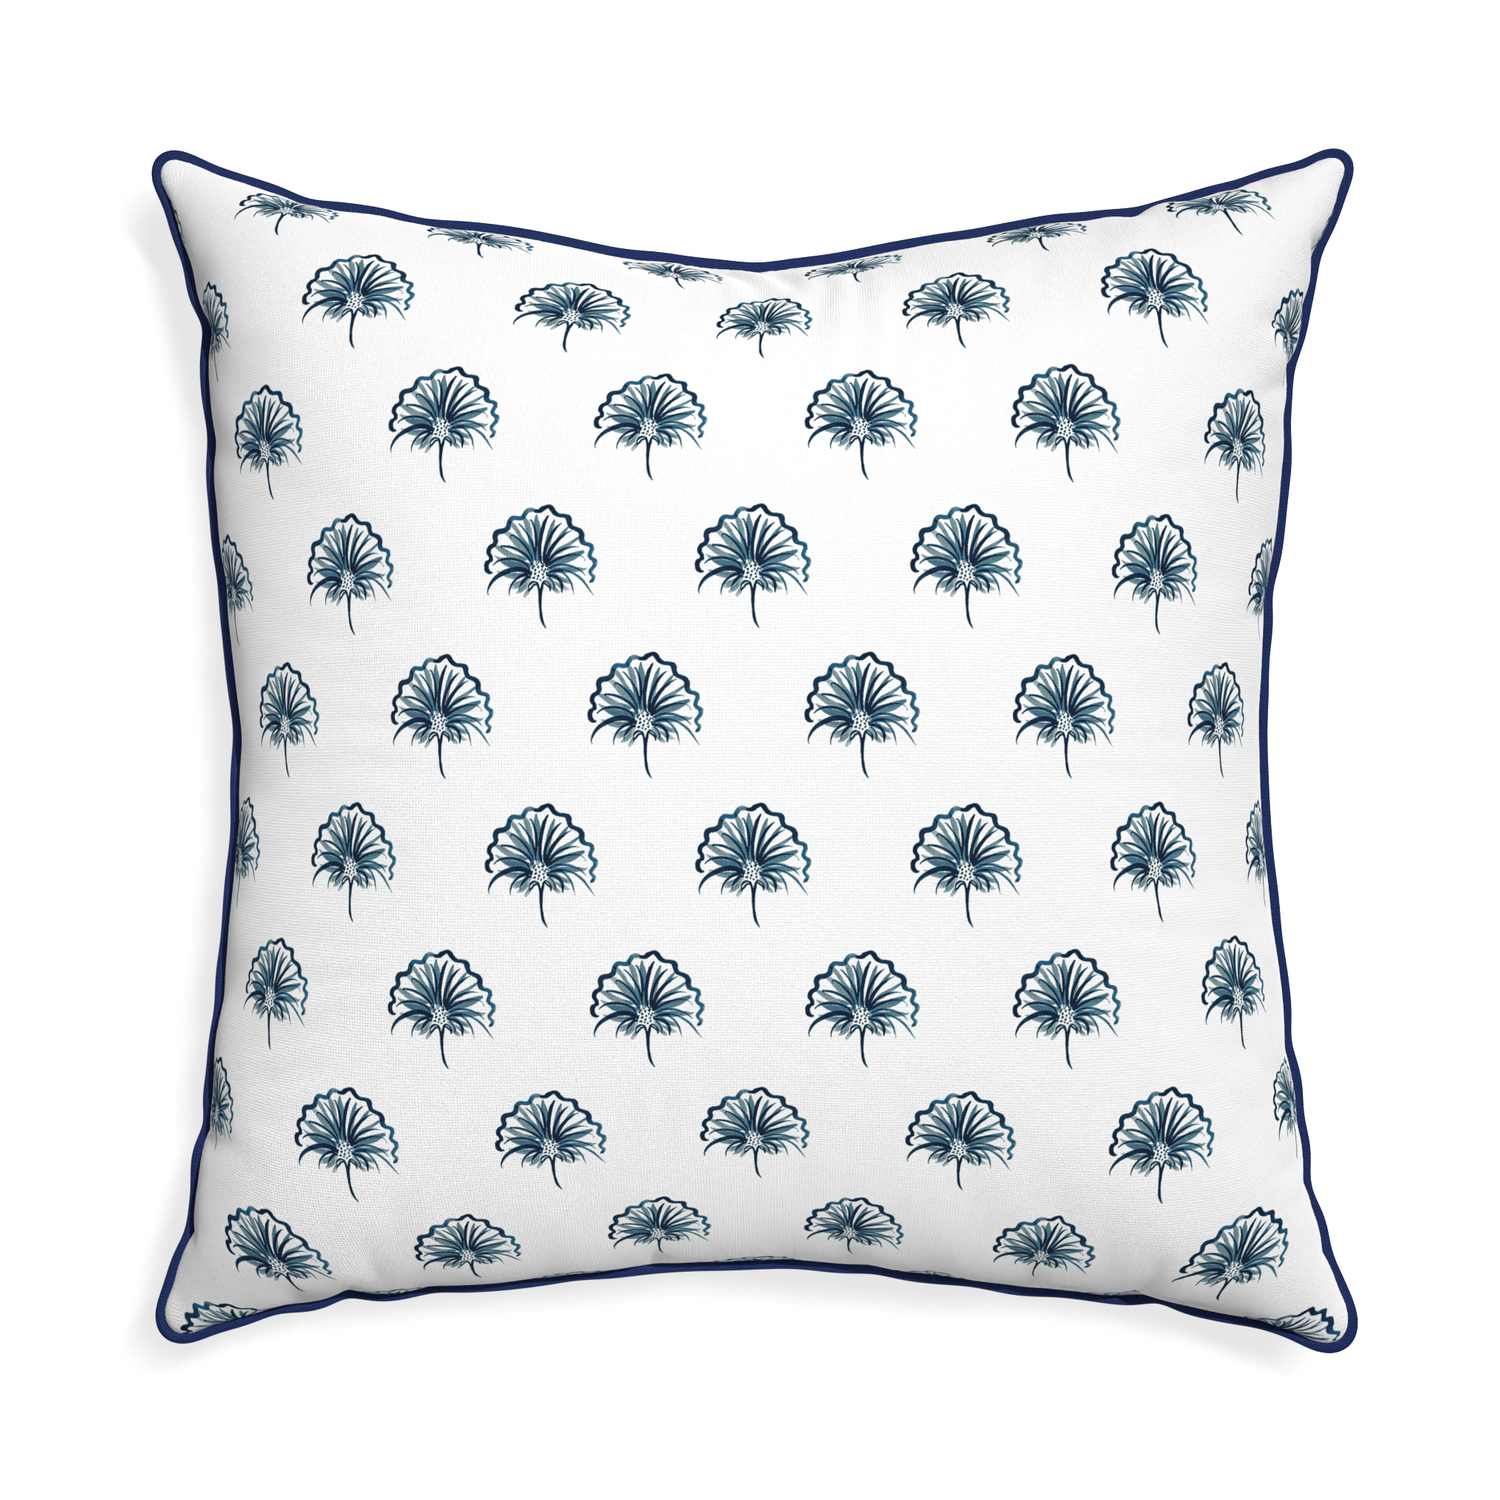 Euro-sham penelope midnight custom floral navypillow with midnight piping on white background